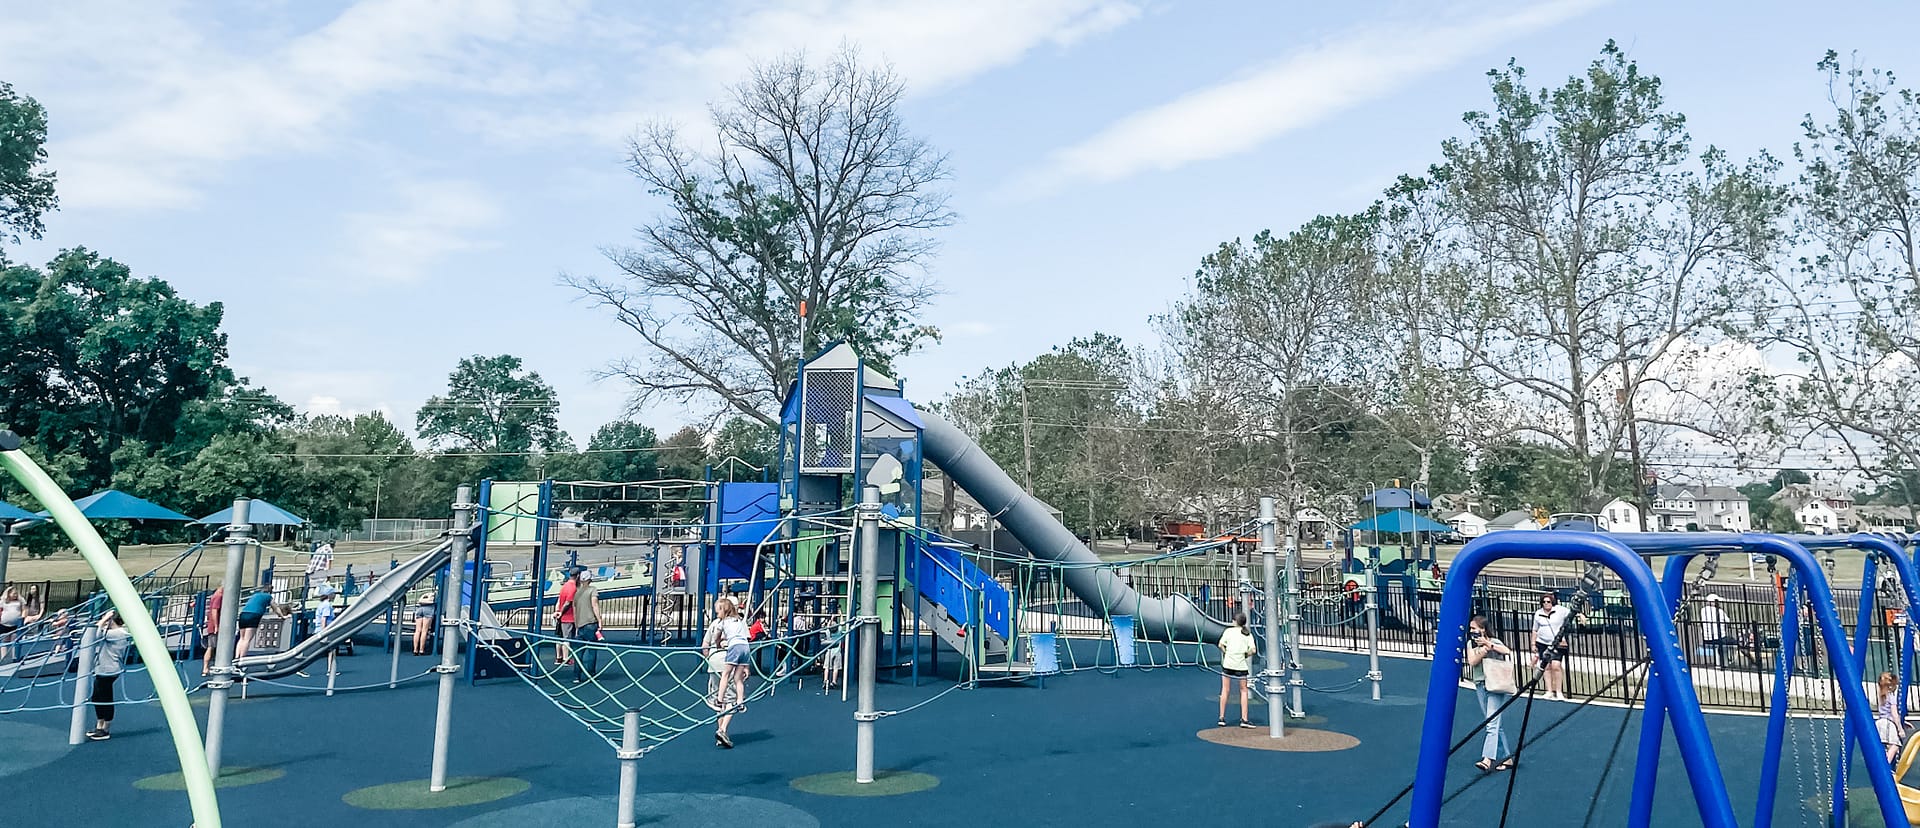 Playground structure with long gray slide